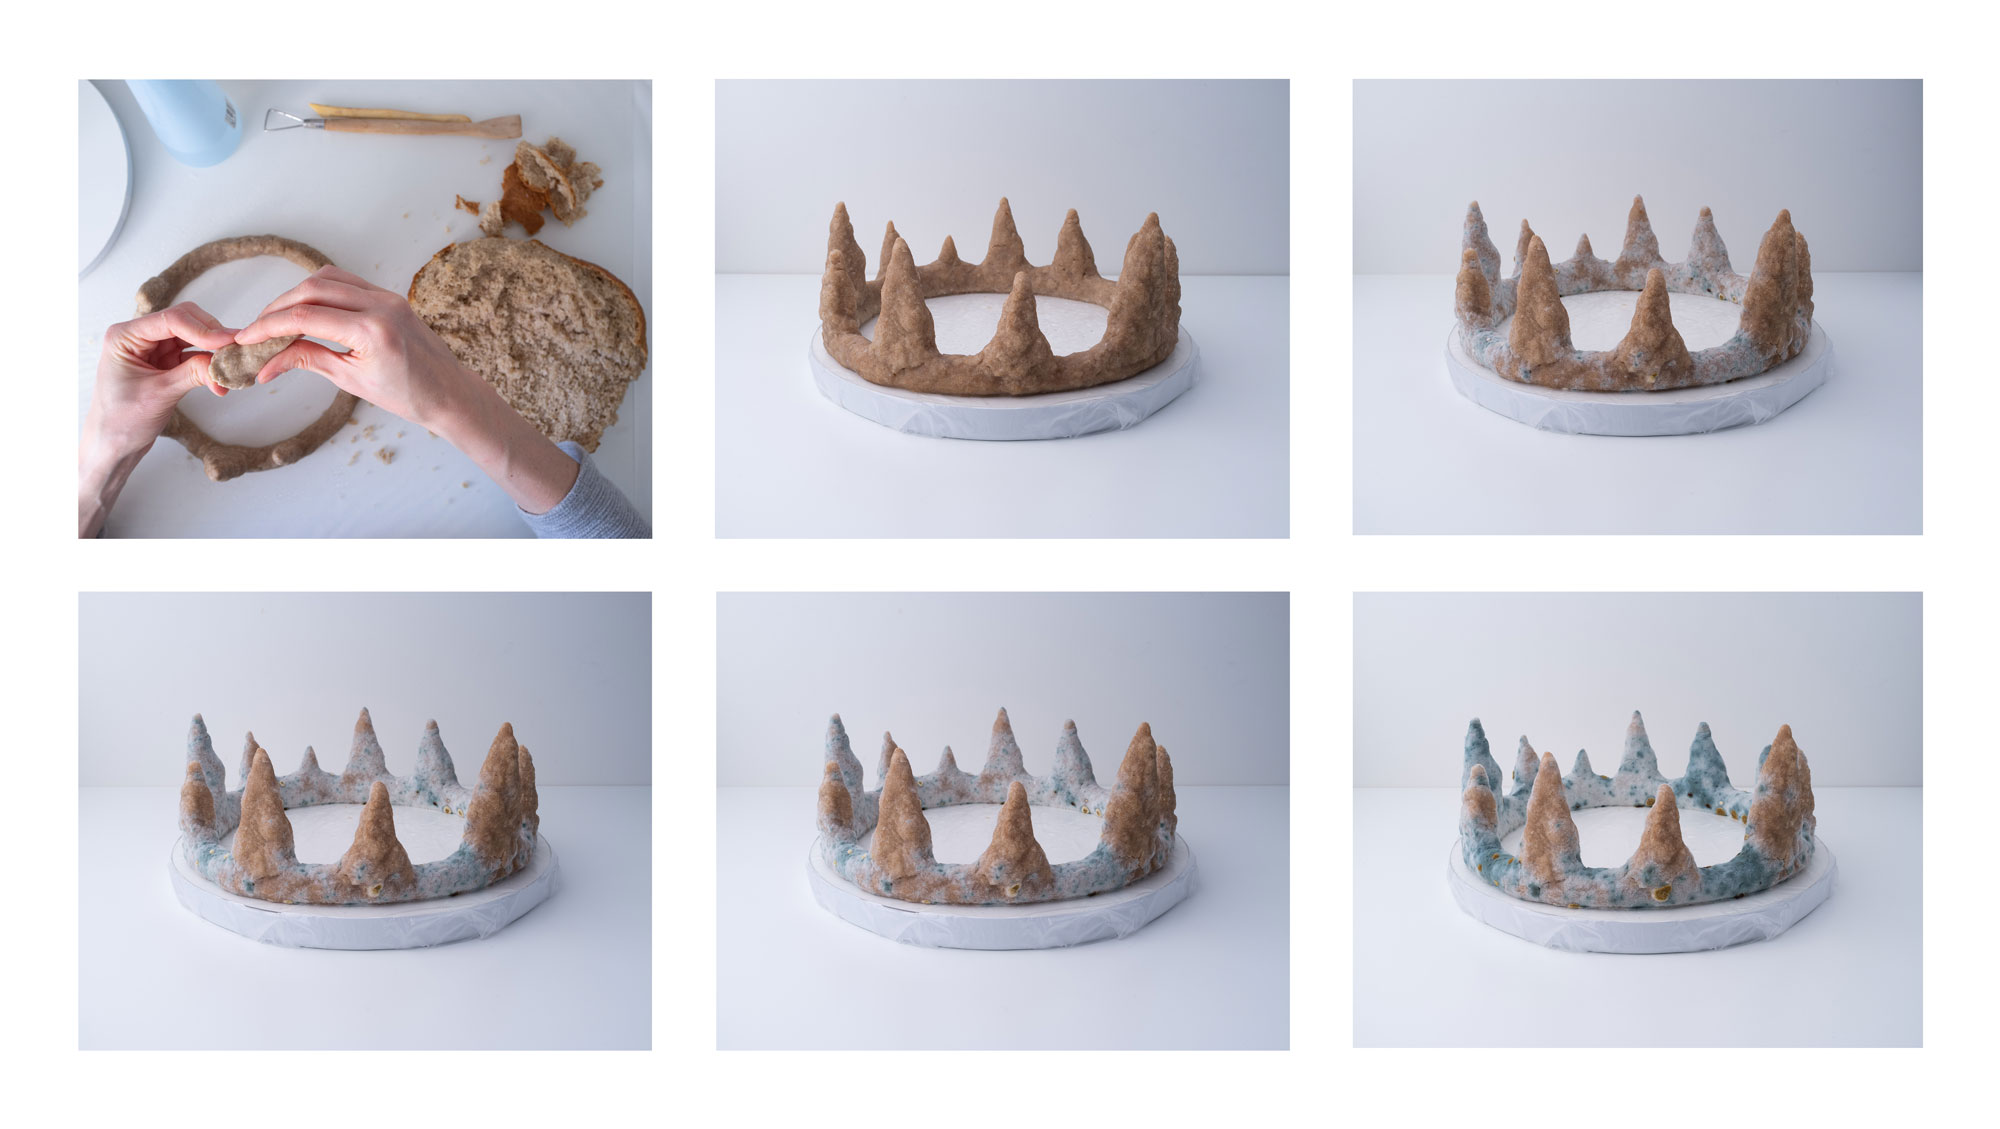 Untitled, 2020. Crown made of bread and mould